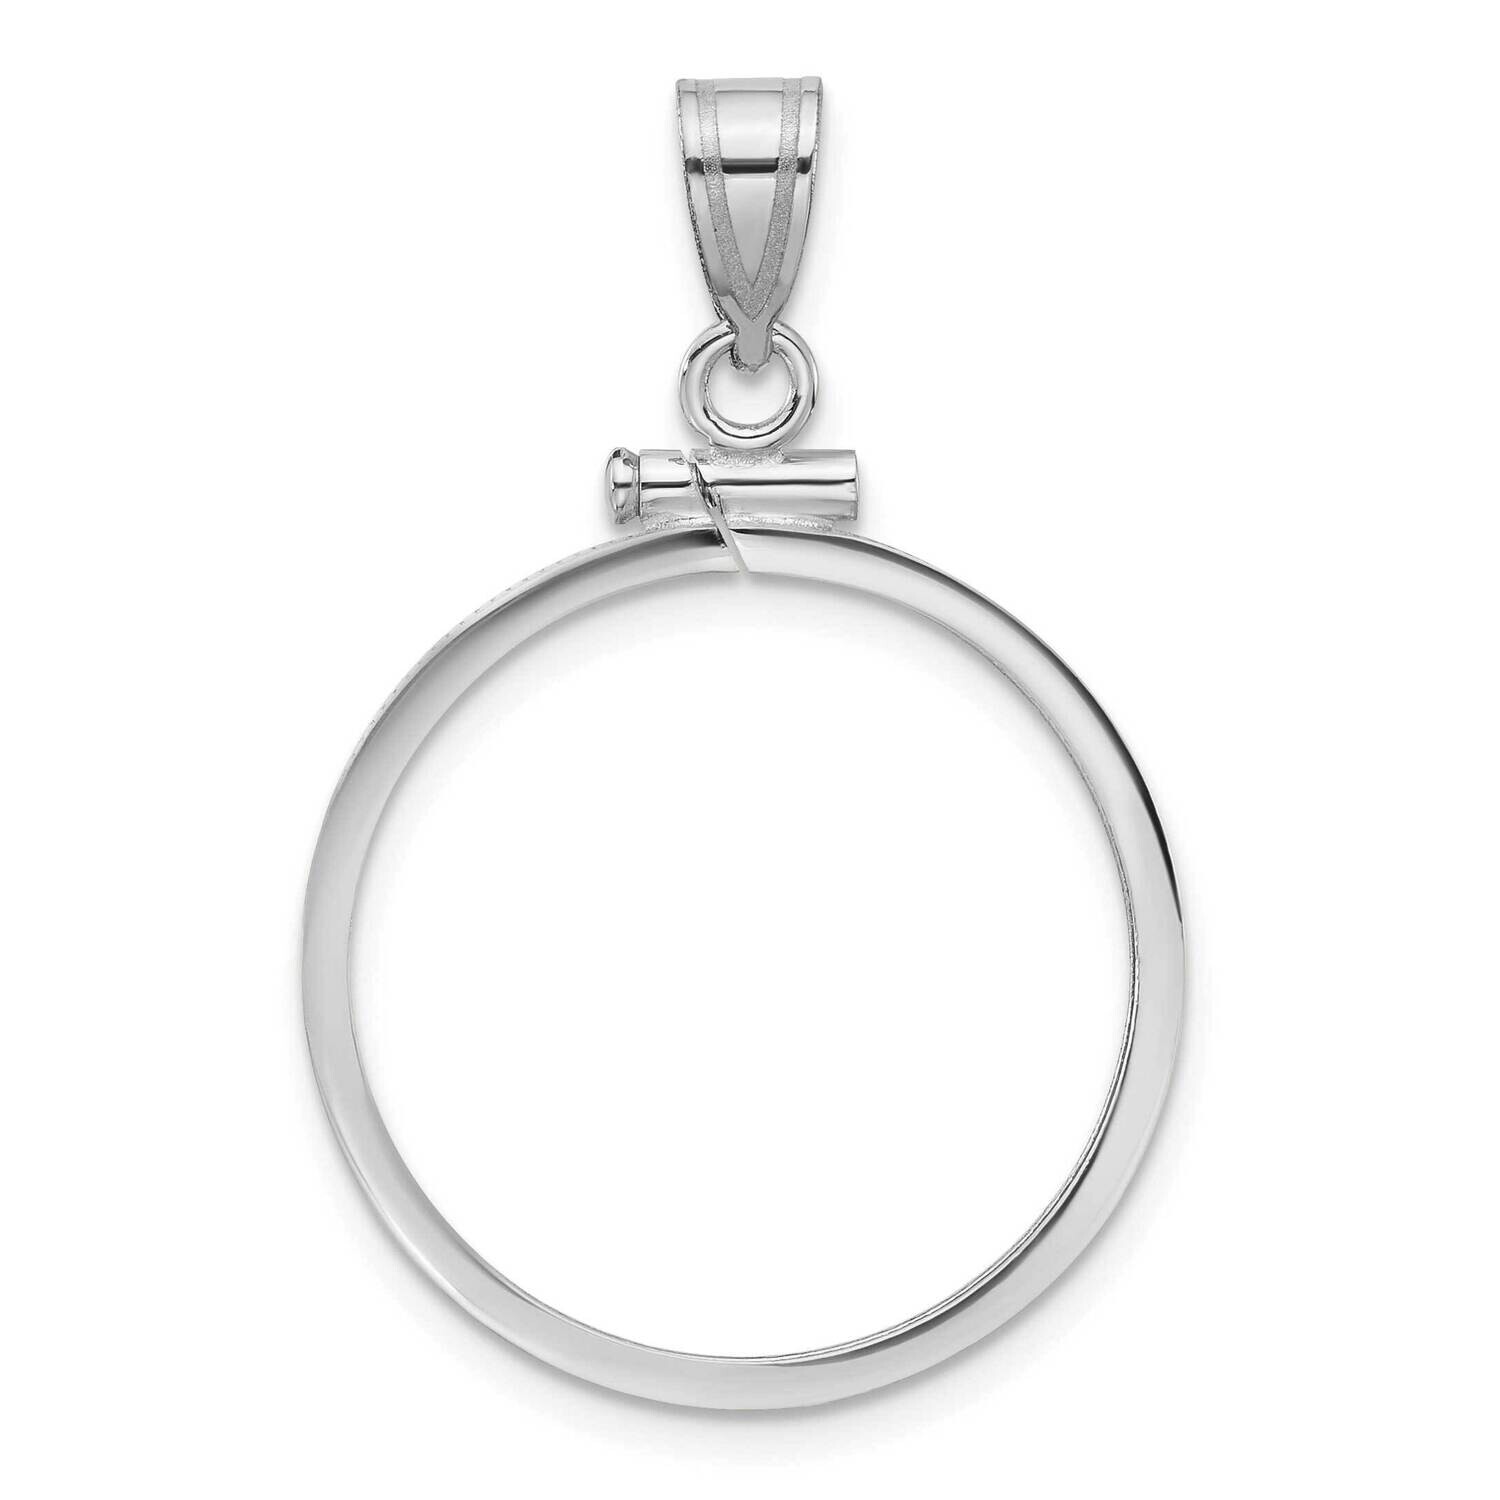 Polished Screw Top 22.0mm X 1.9mm Coin Bezel Pendant 14k White Gold C1885W/22.0